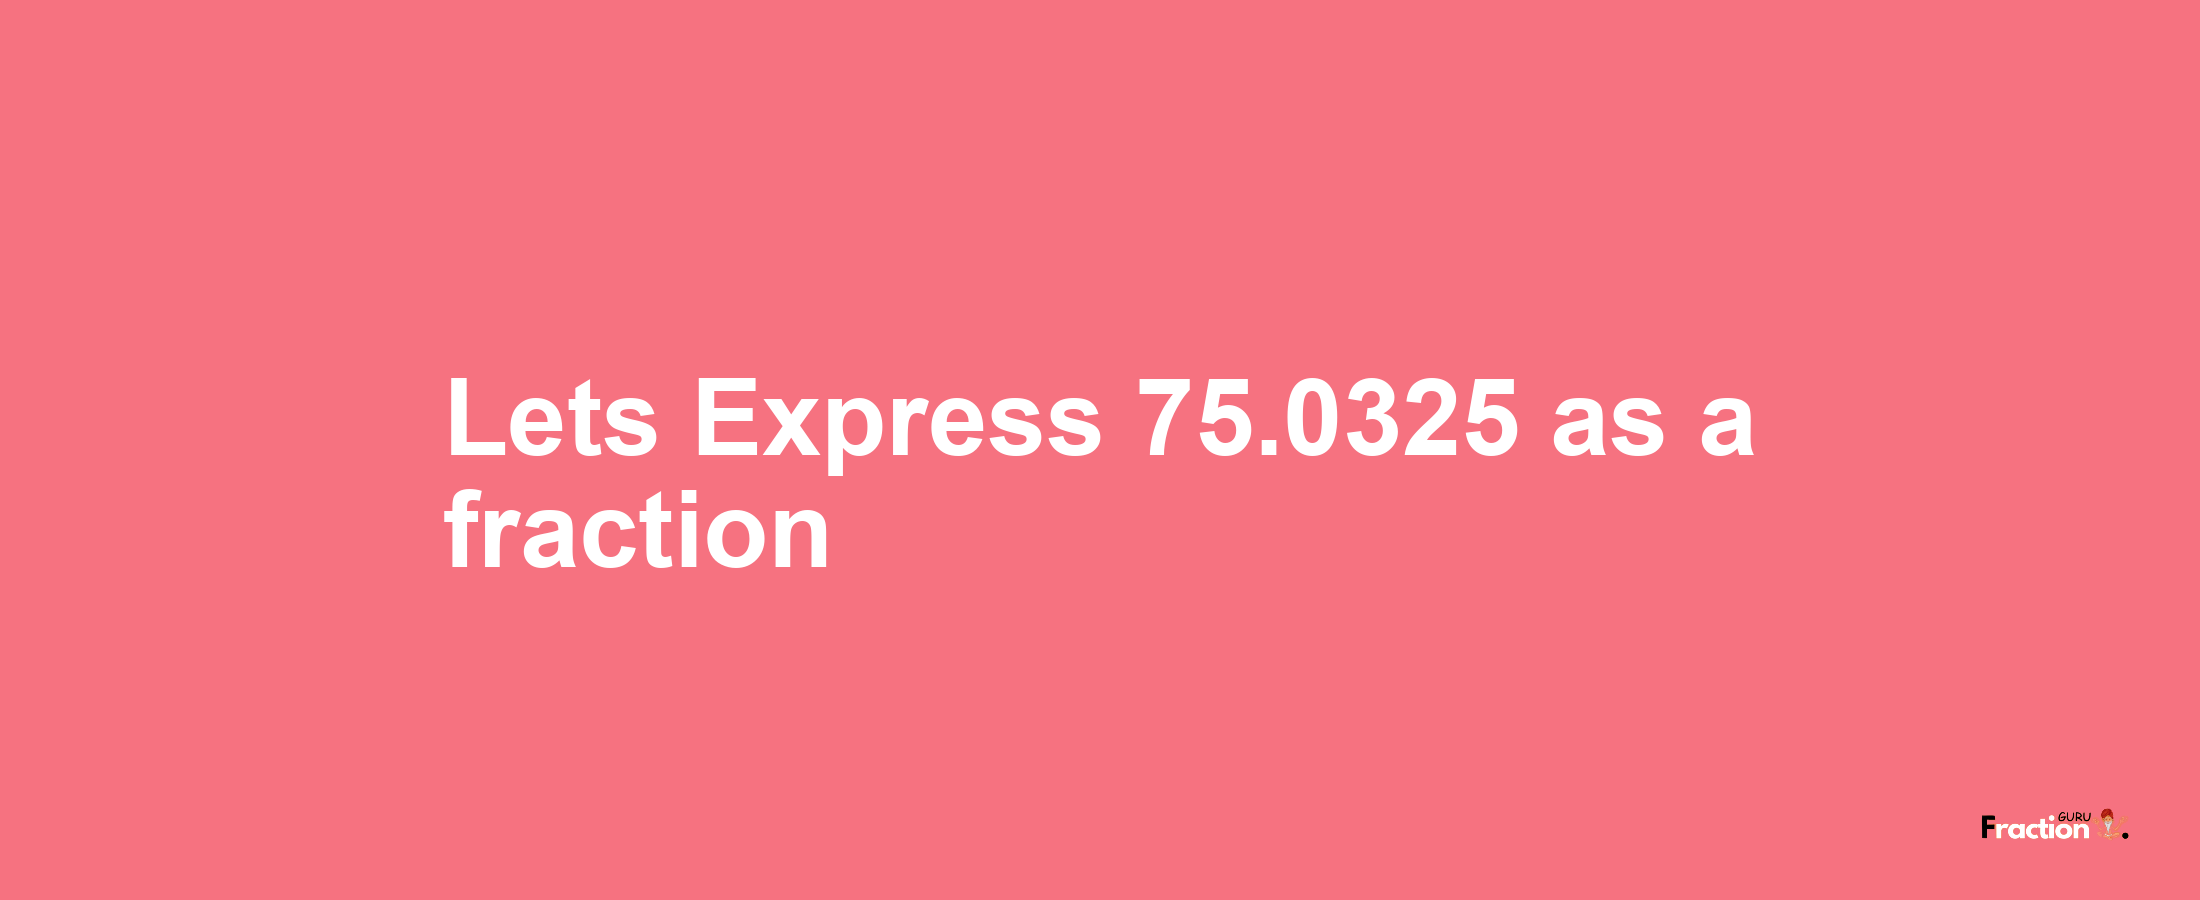 Lets Express 75.0325 as afraction